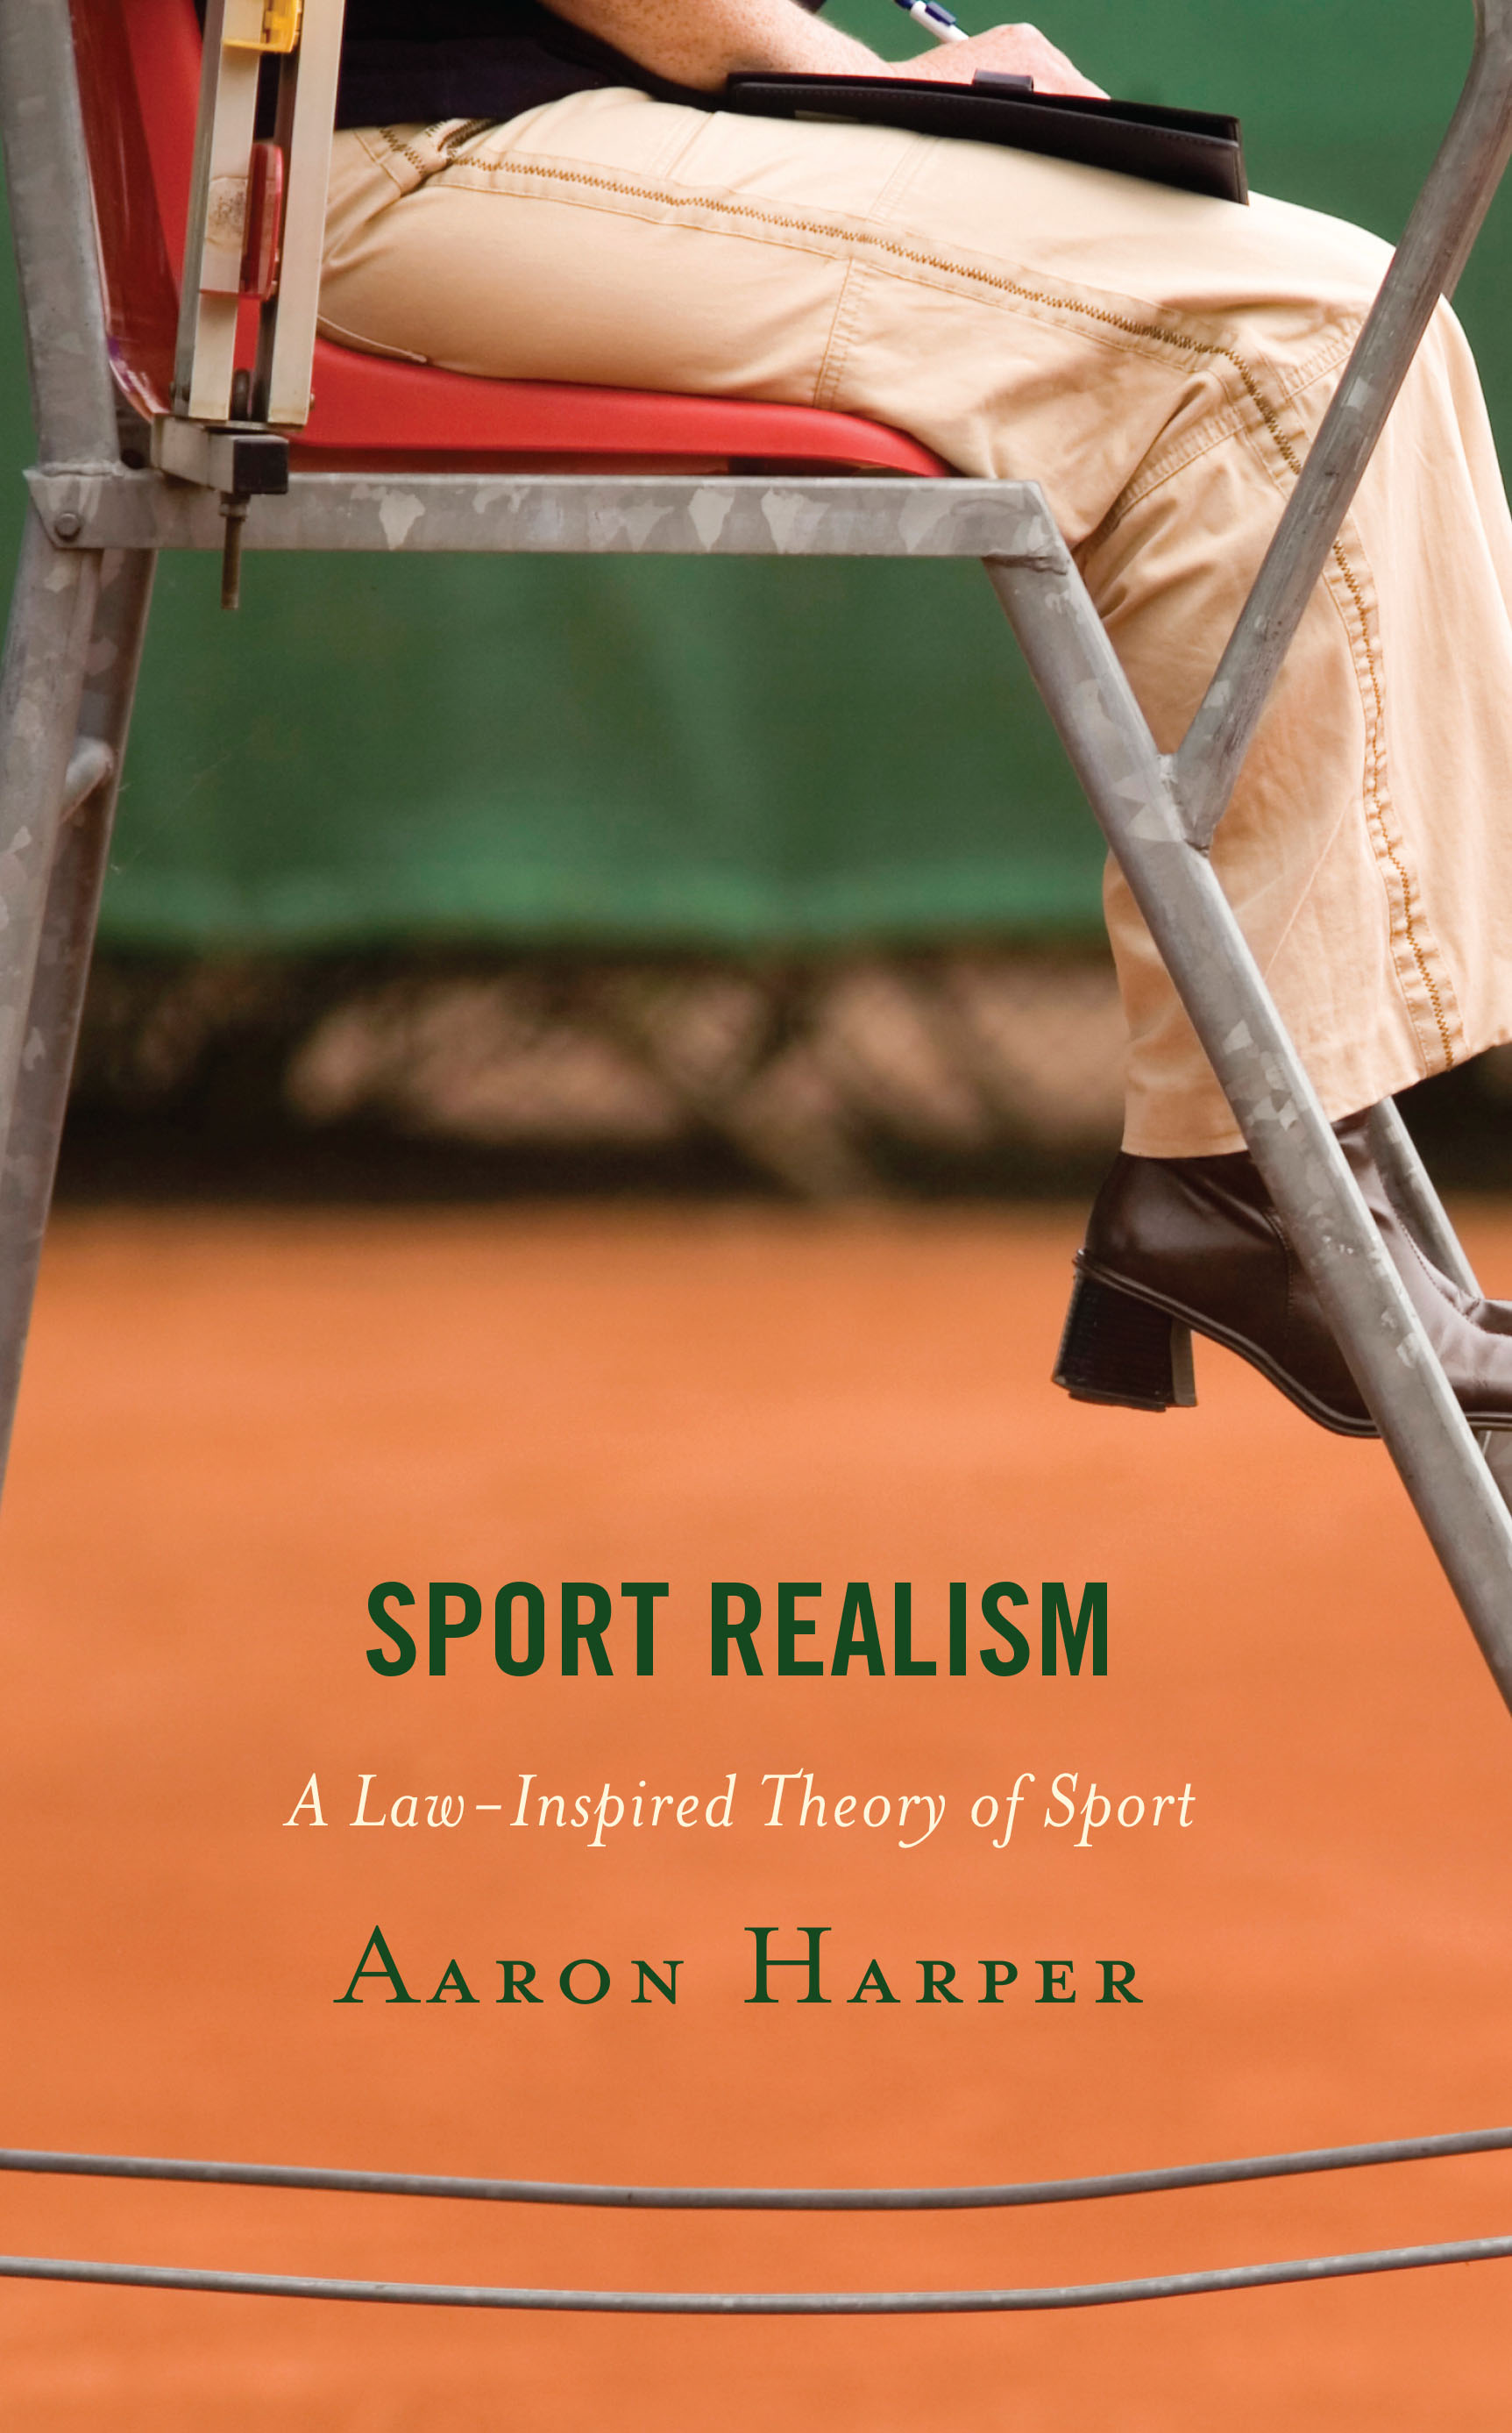 Sport Realism: A Law-Inspired Theory of Sport